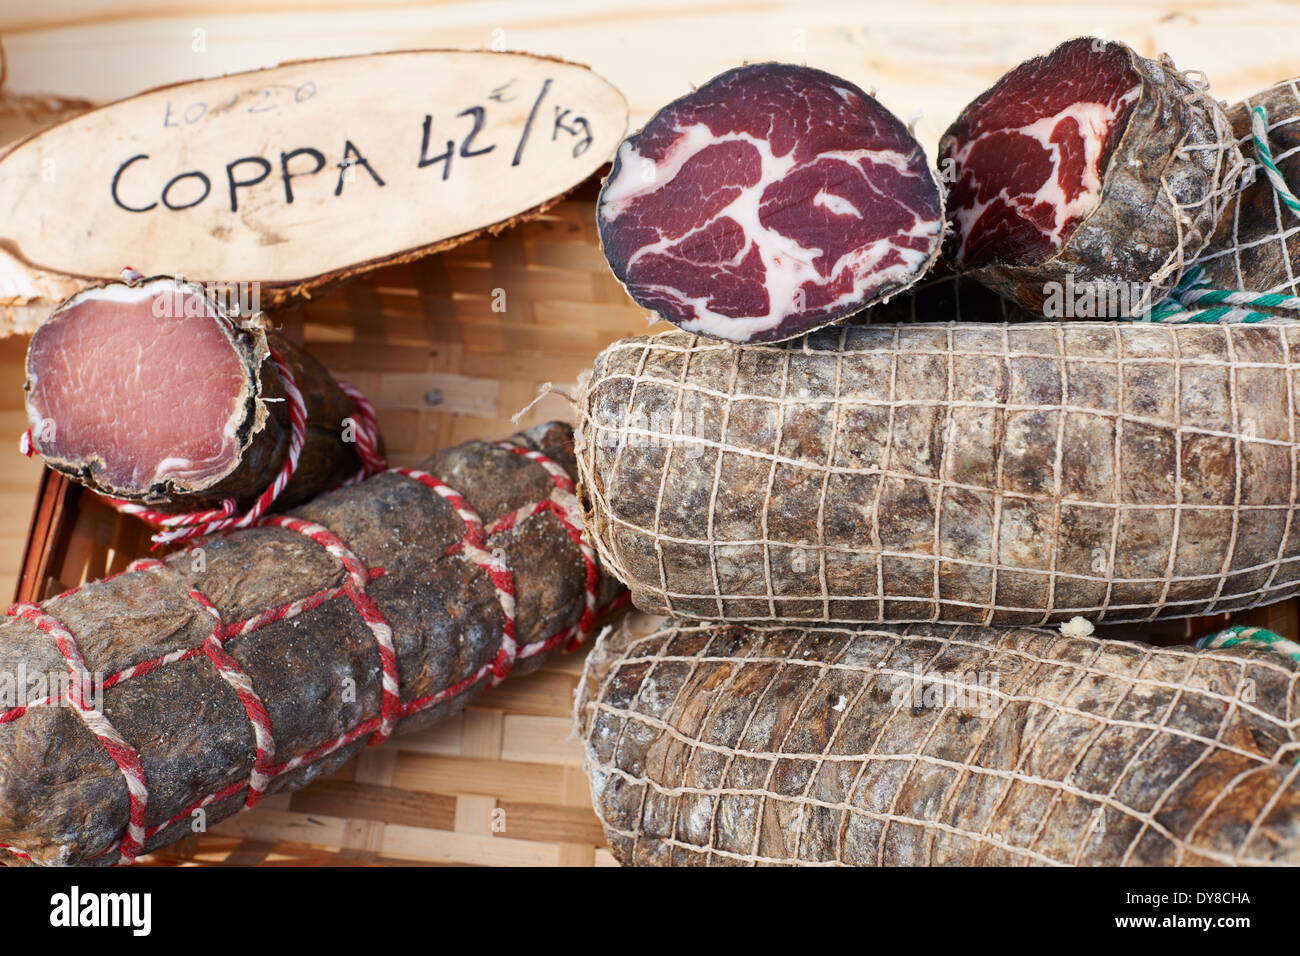 Rural hand-made sausage Coppa, gourmet meat product on Provence market Stock Photo